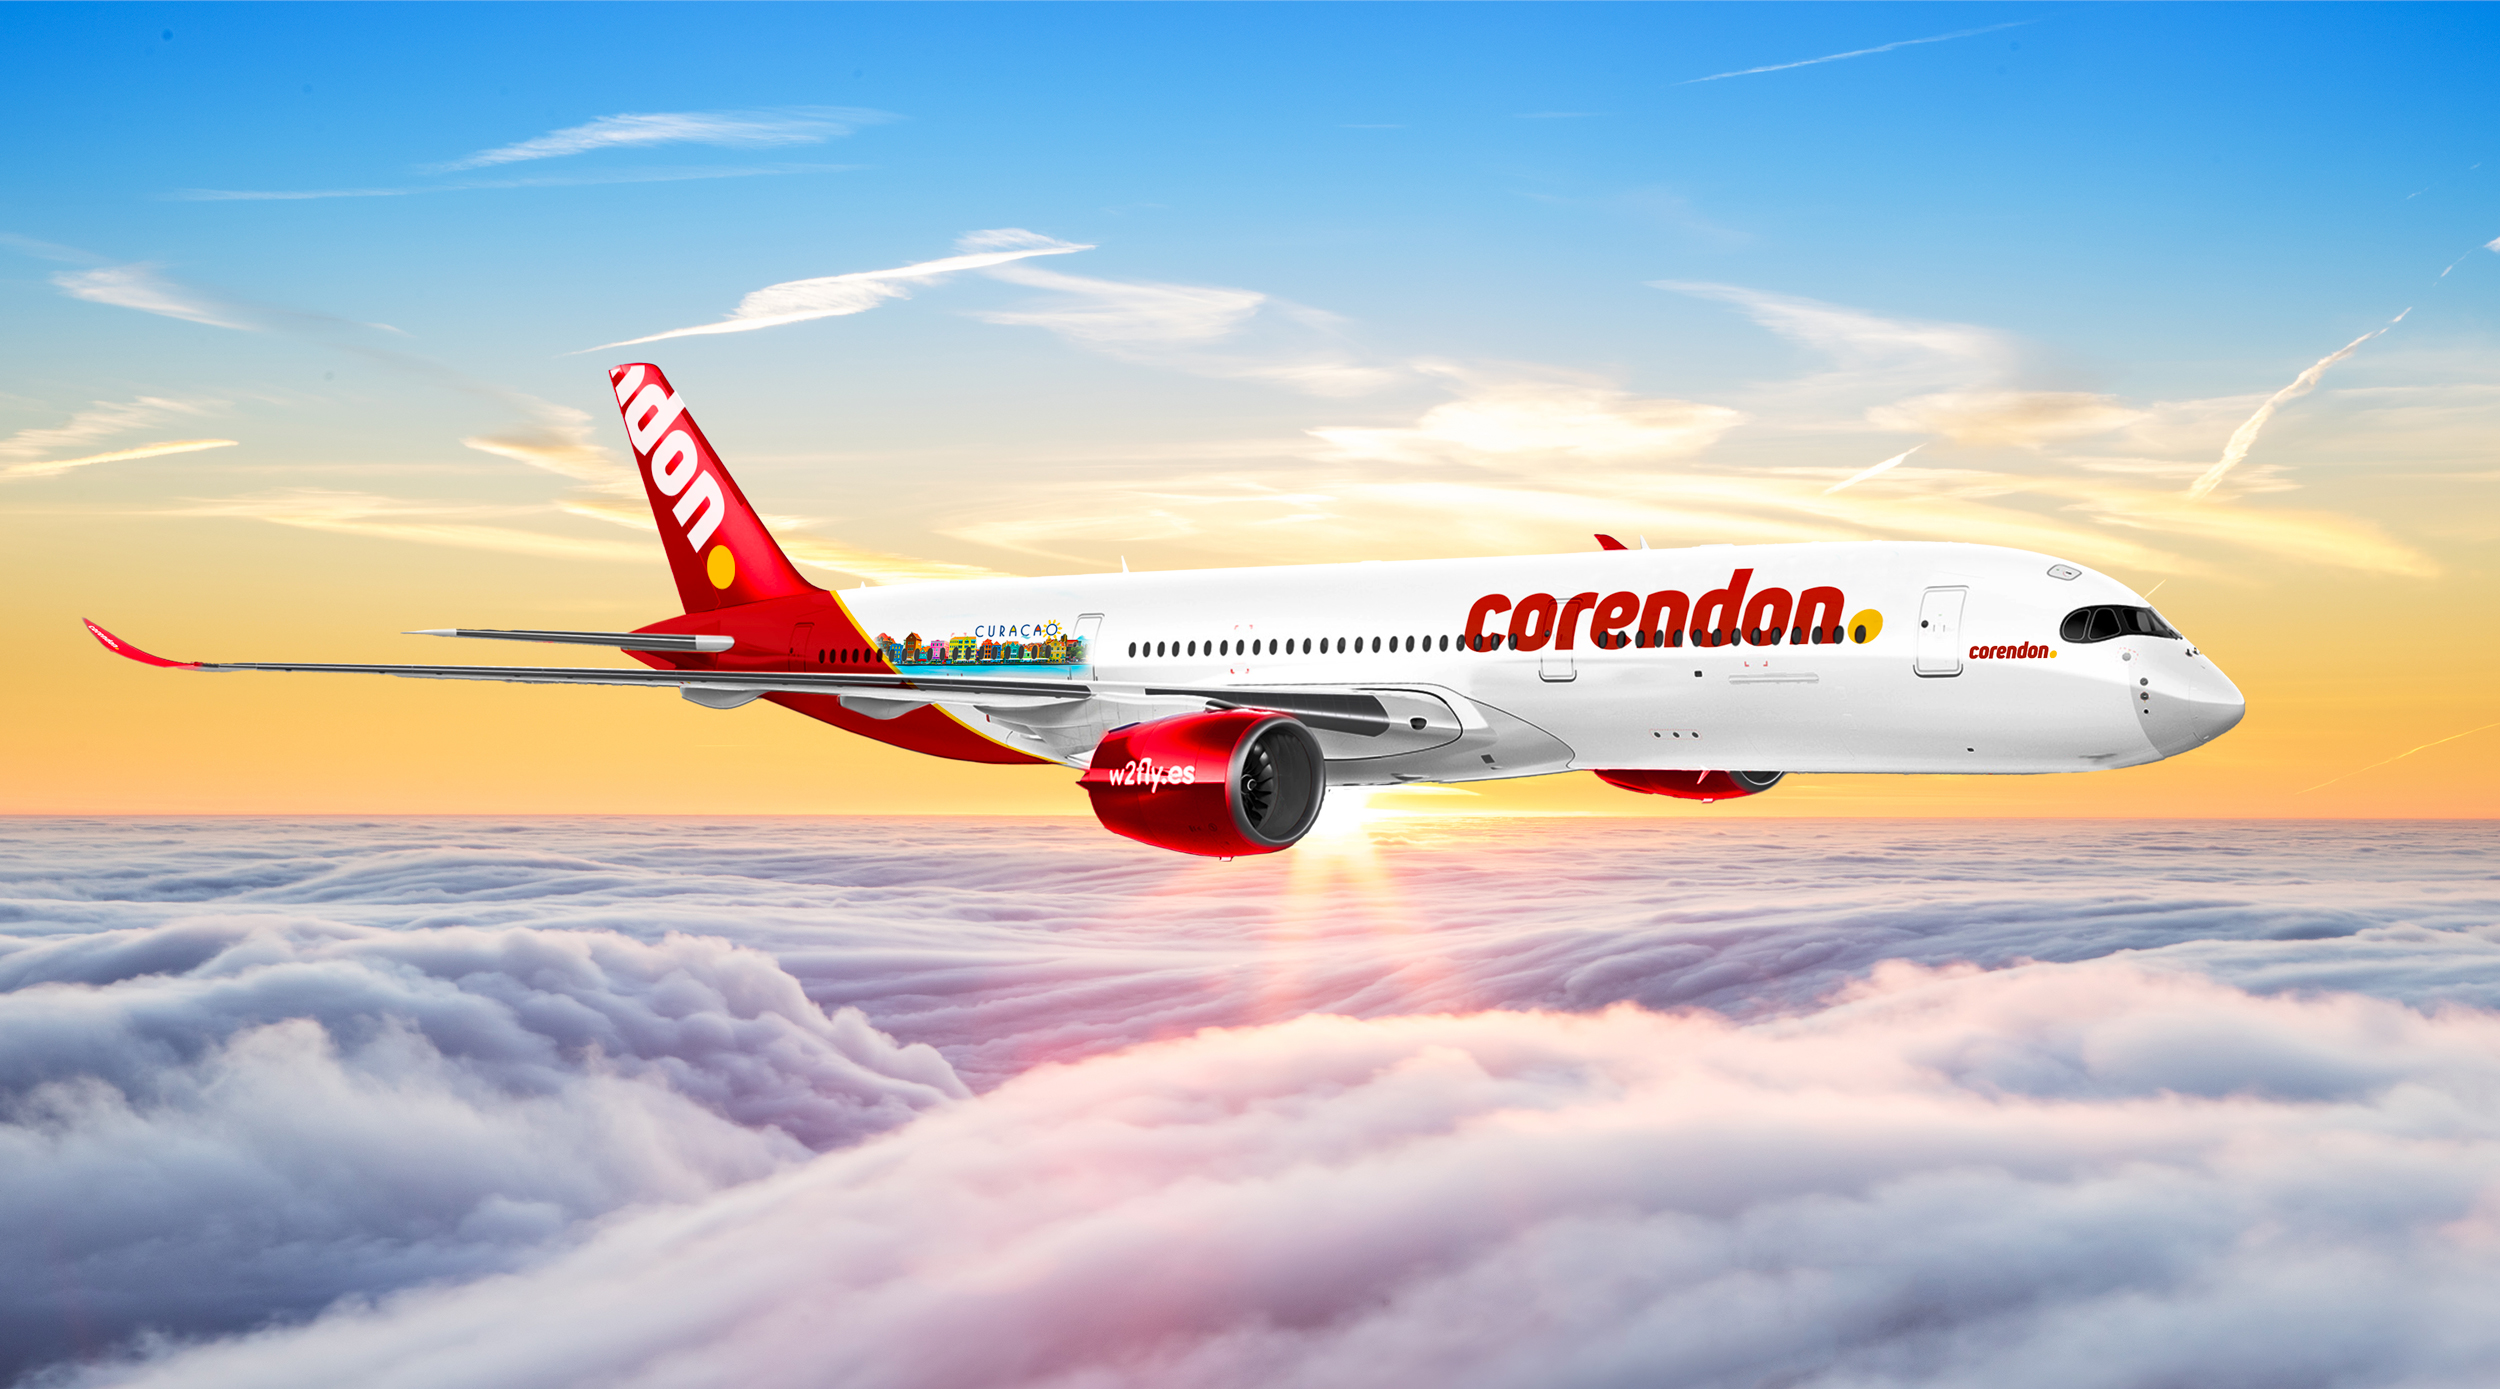 A Corendon Airlines airplane flying above clouds with a sunset in the background